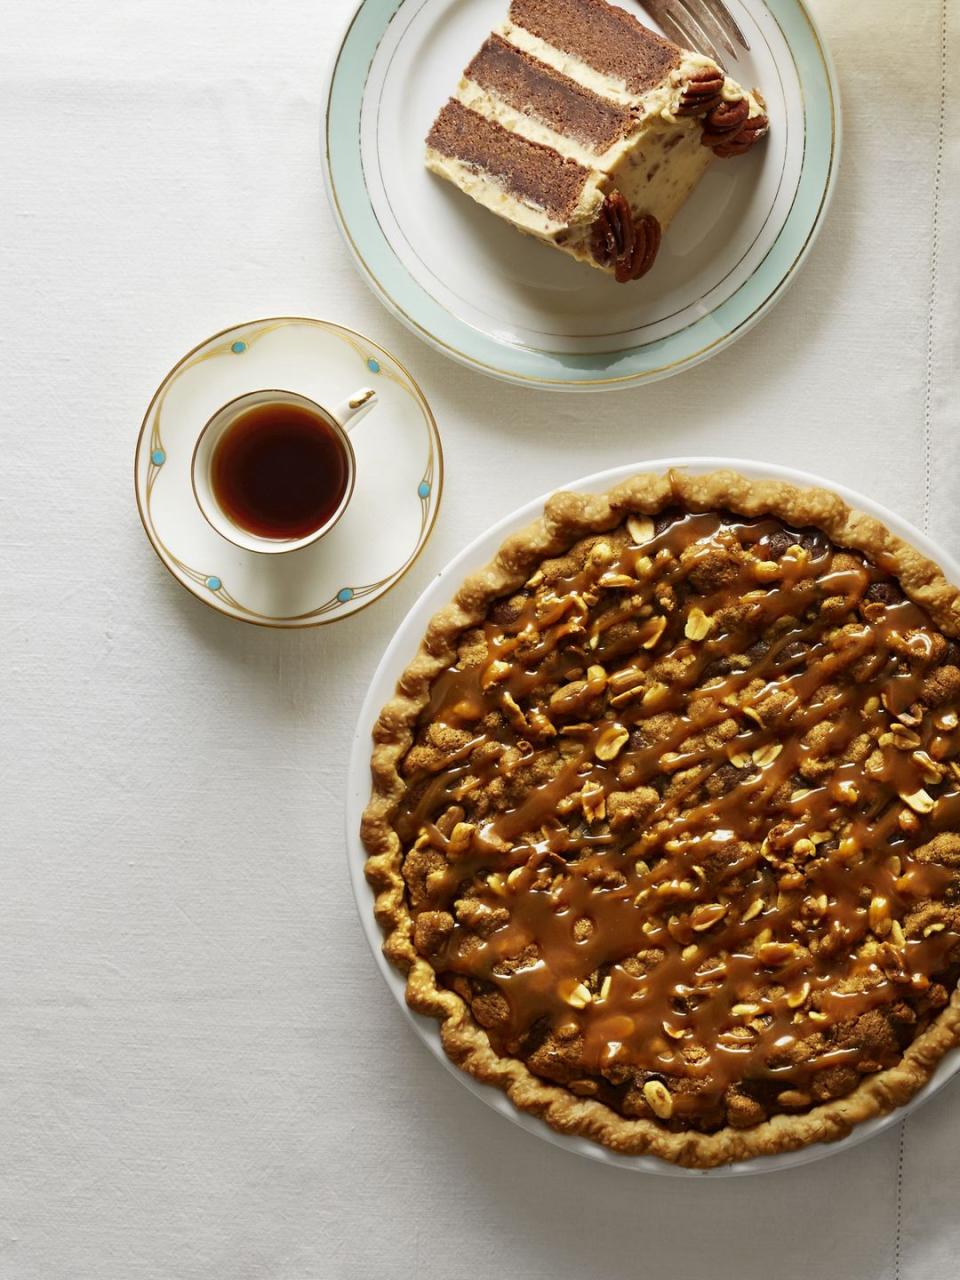 salted caramel peanut butter fudge pie in a white pie plate with small cups of coffee or tea